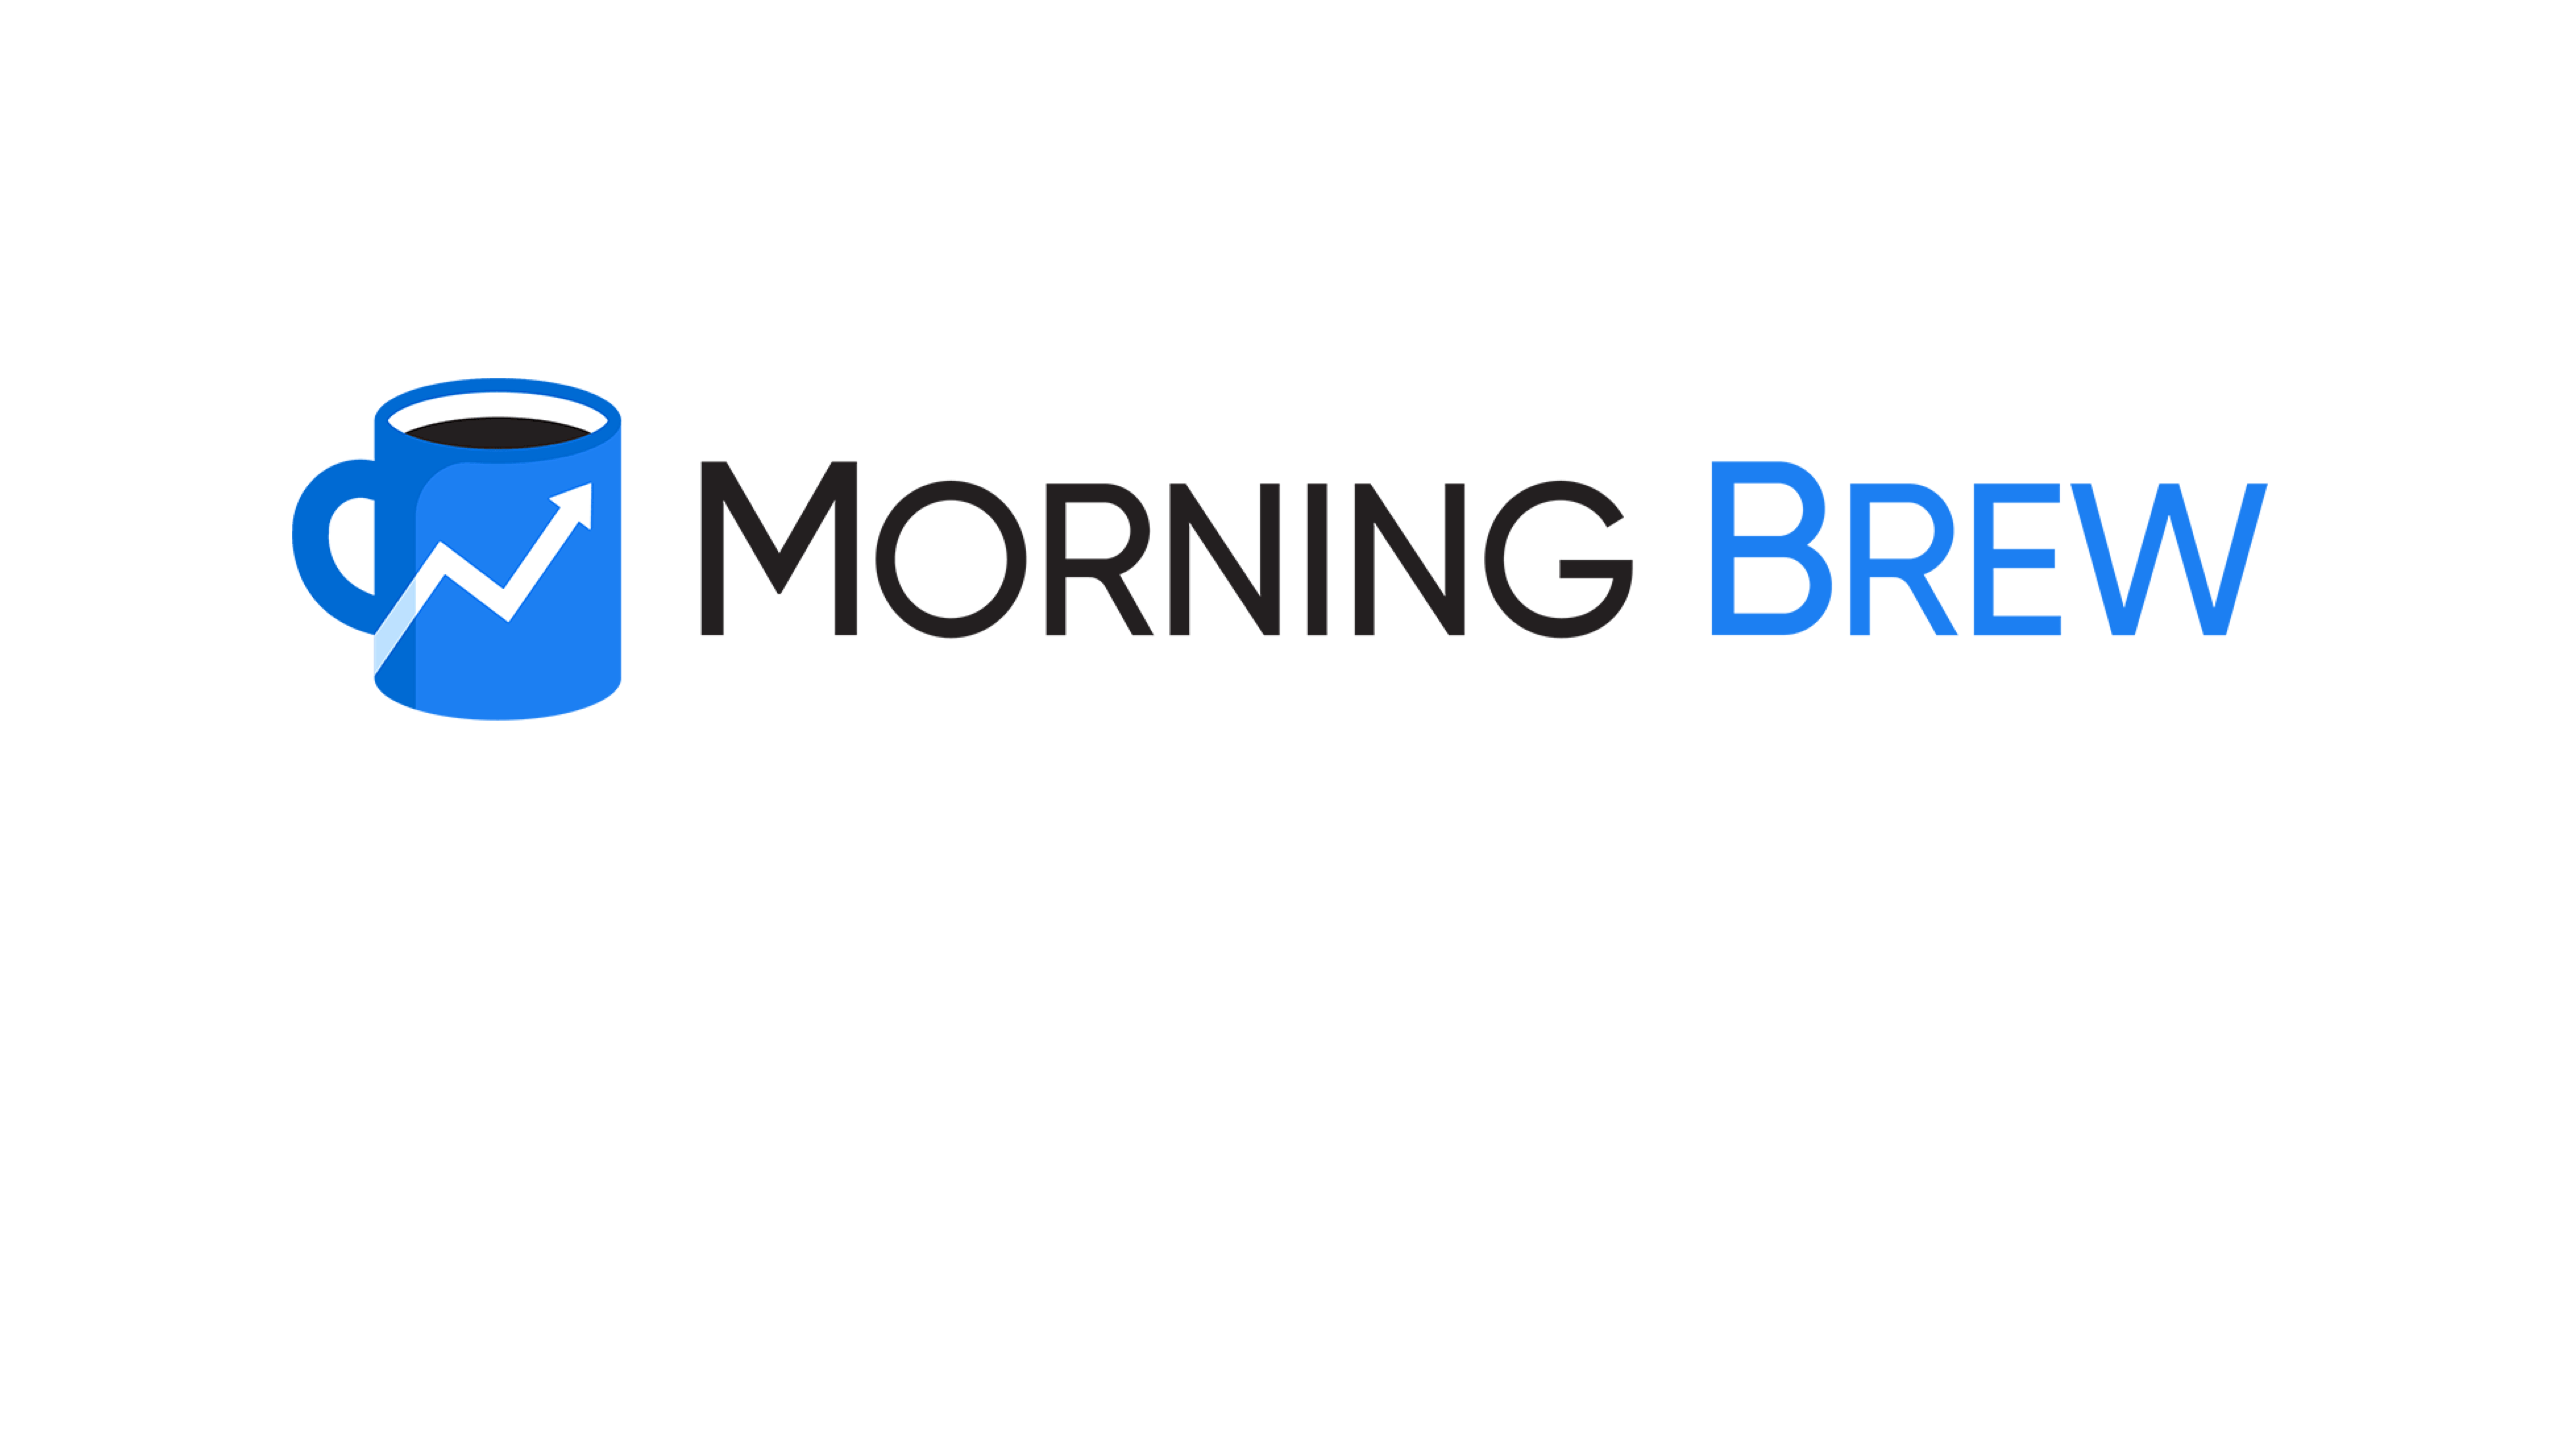 The Real Reason Why Morning Brew Grew To 1.5 Million Subs In 5 Years Case Study Tile